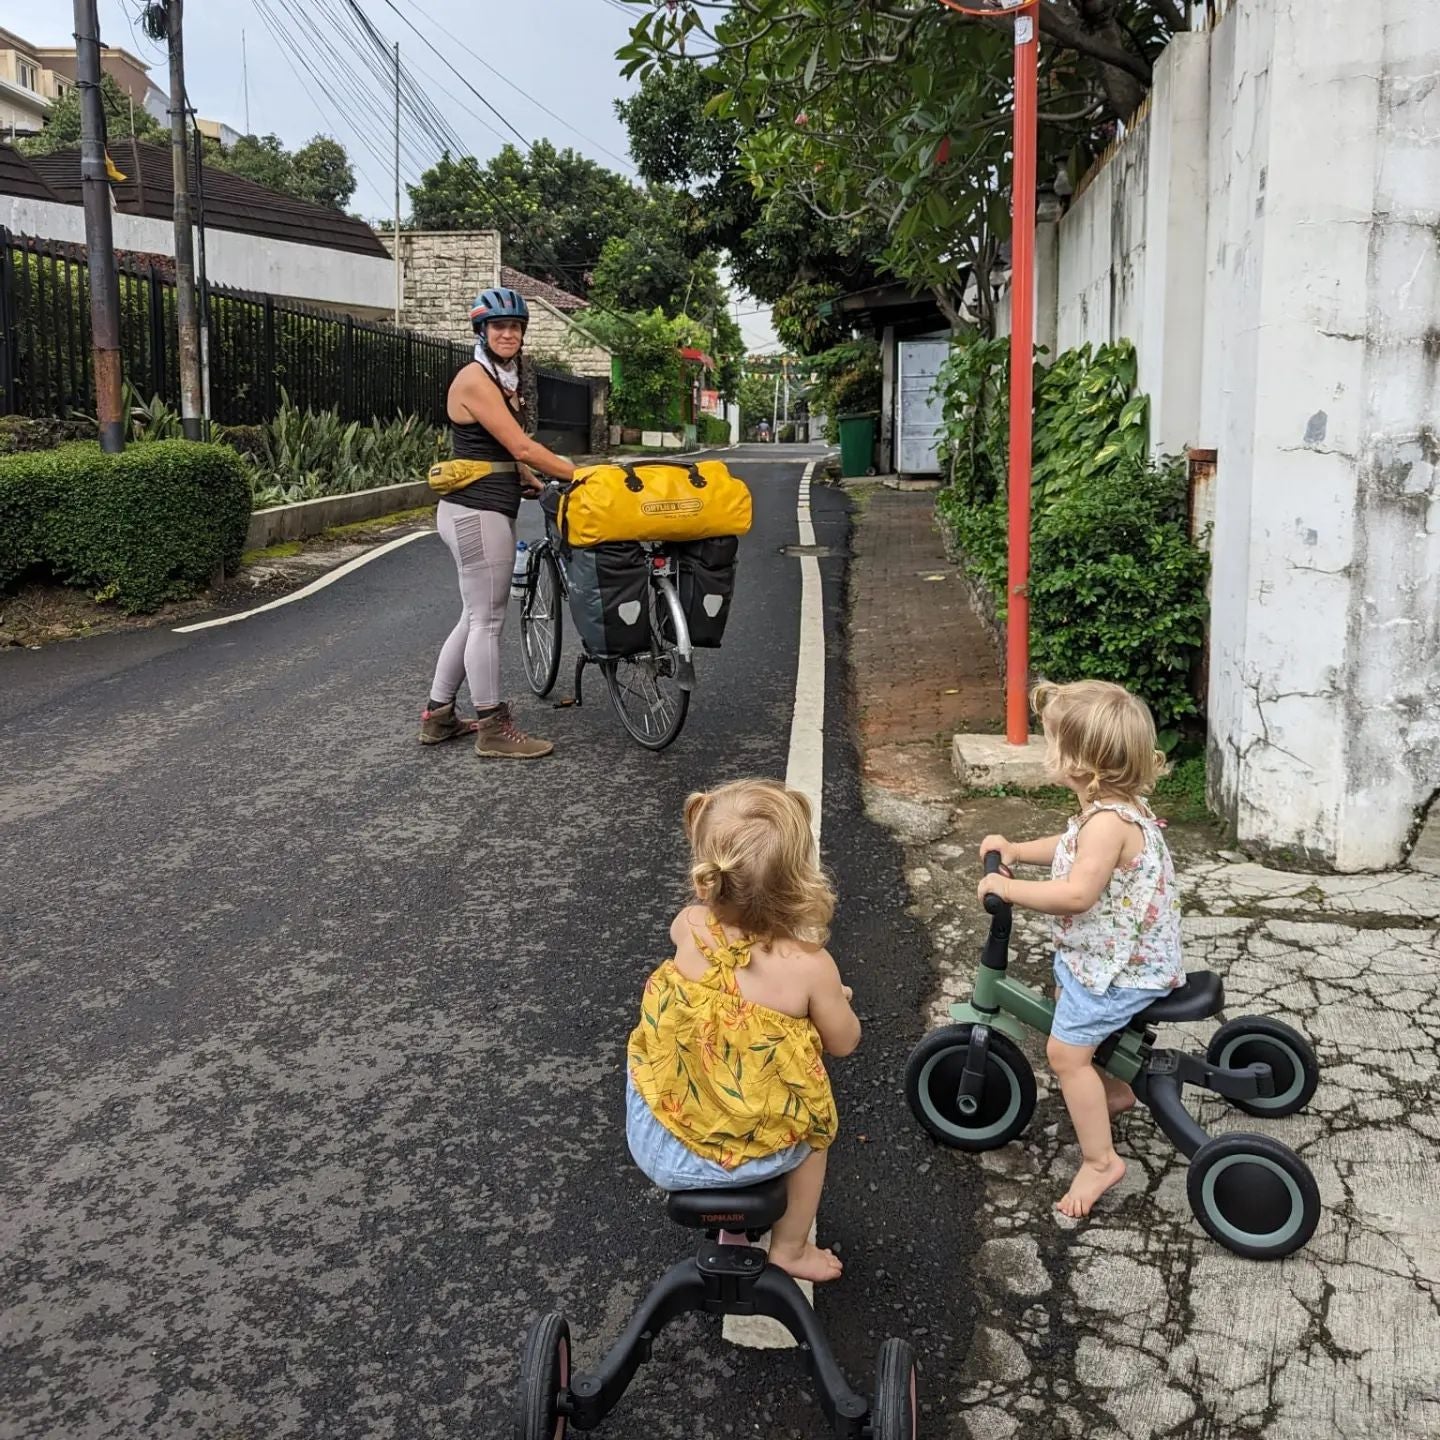 Two children on a tricycle, looking at a woman who is holding her own bicycle which has multiple bags and cases attached to it.